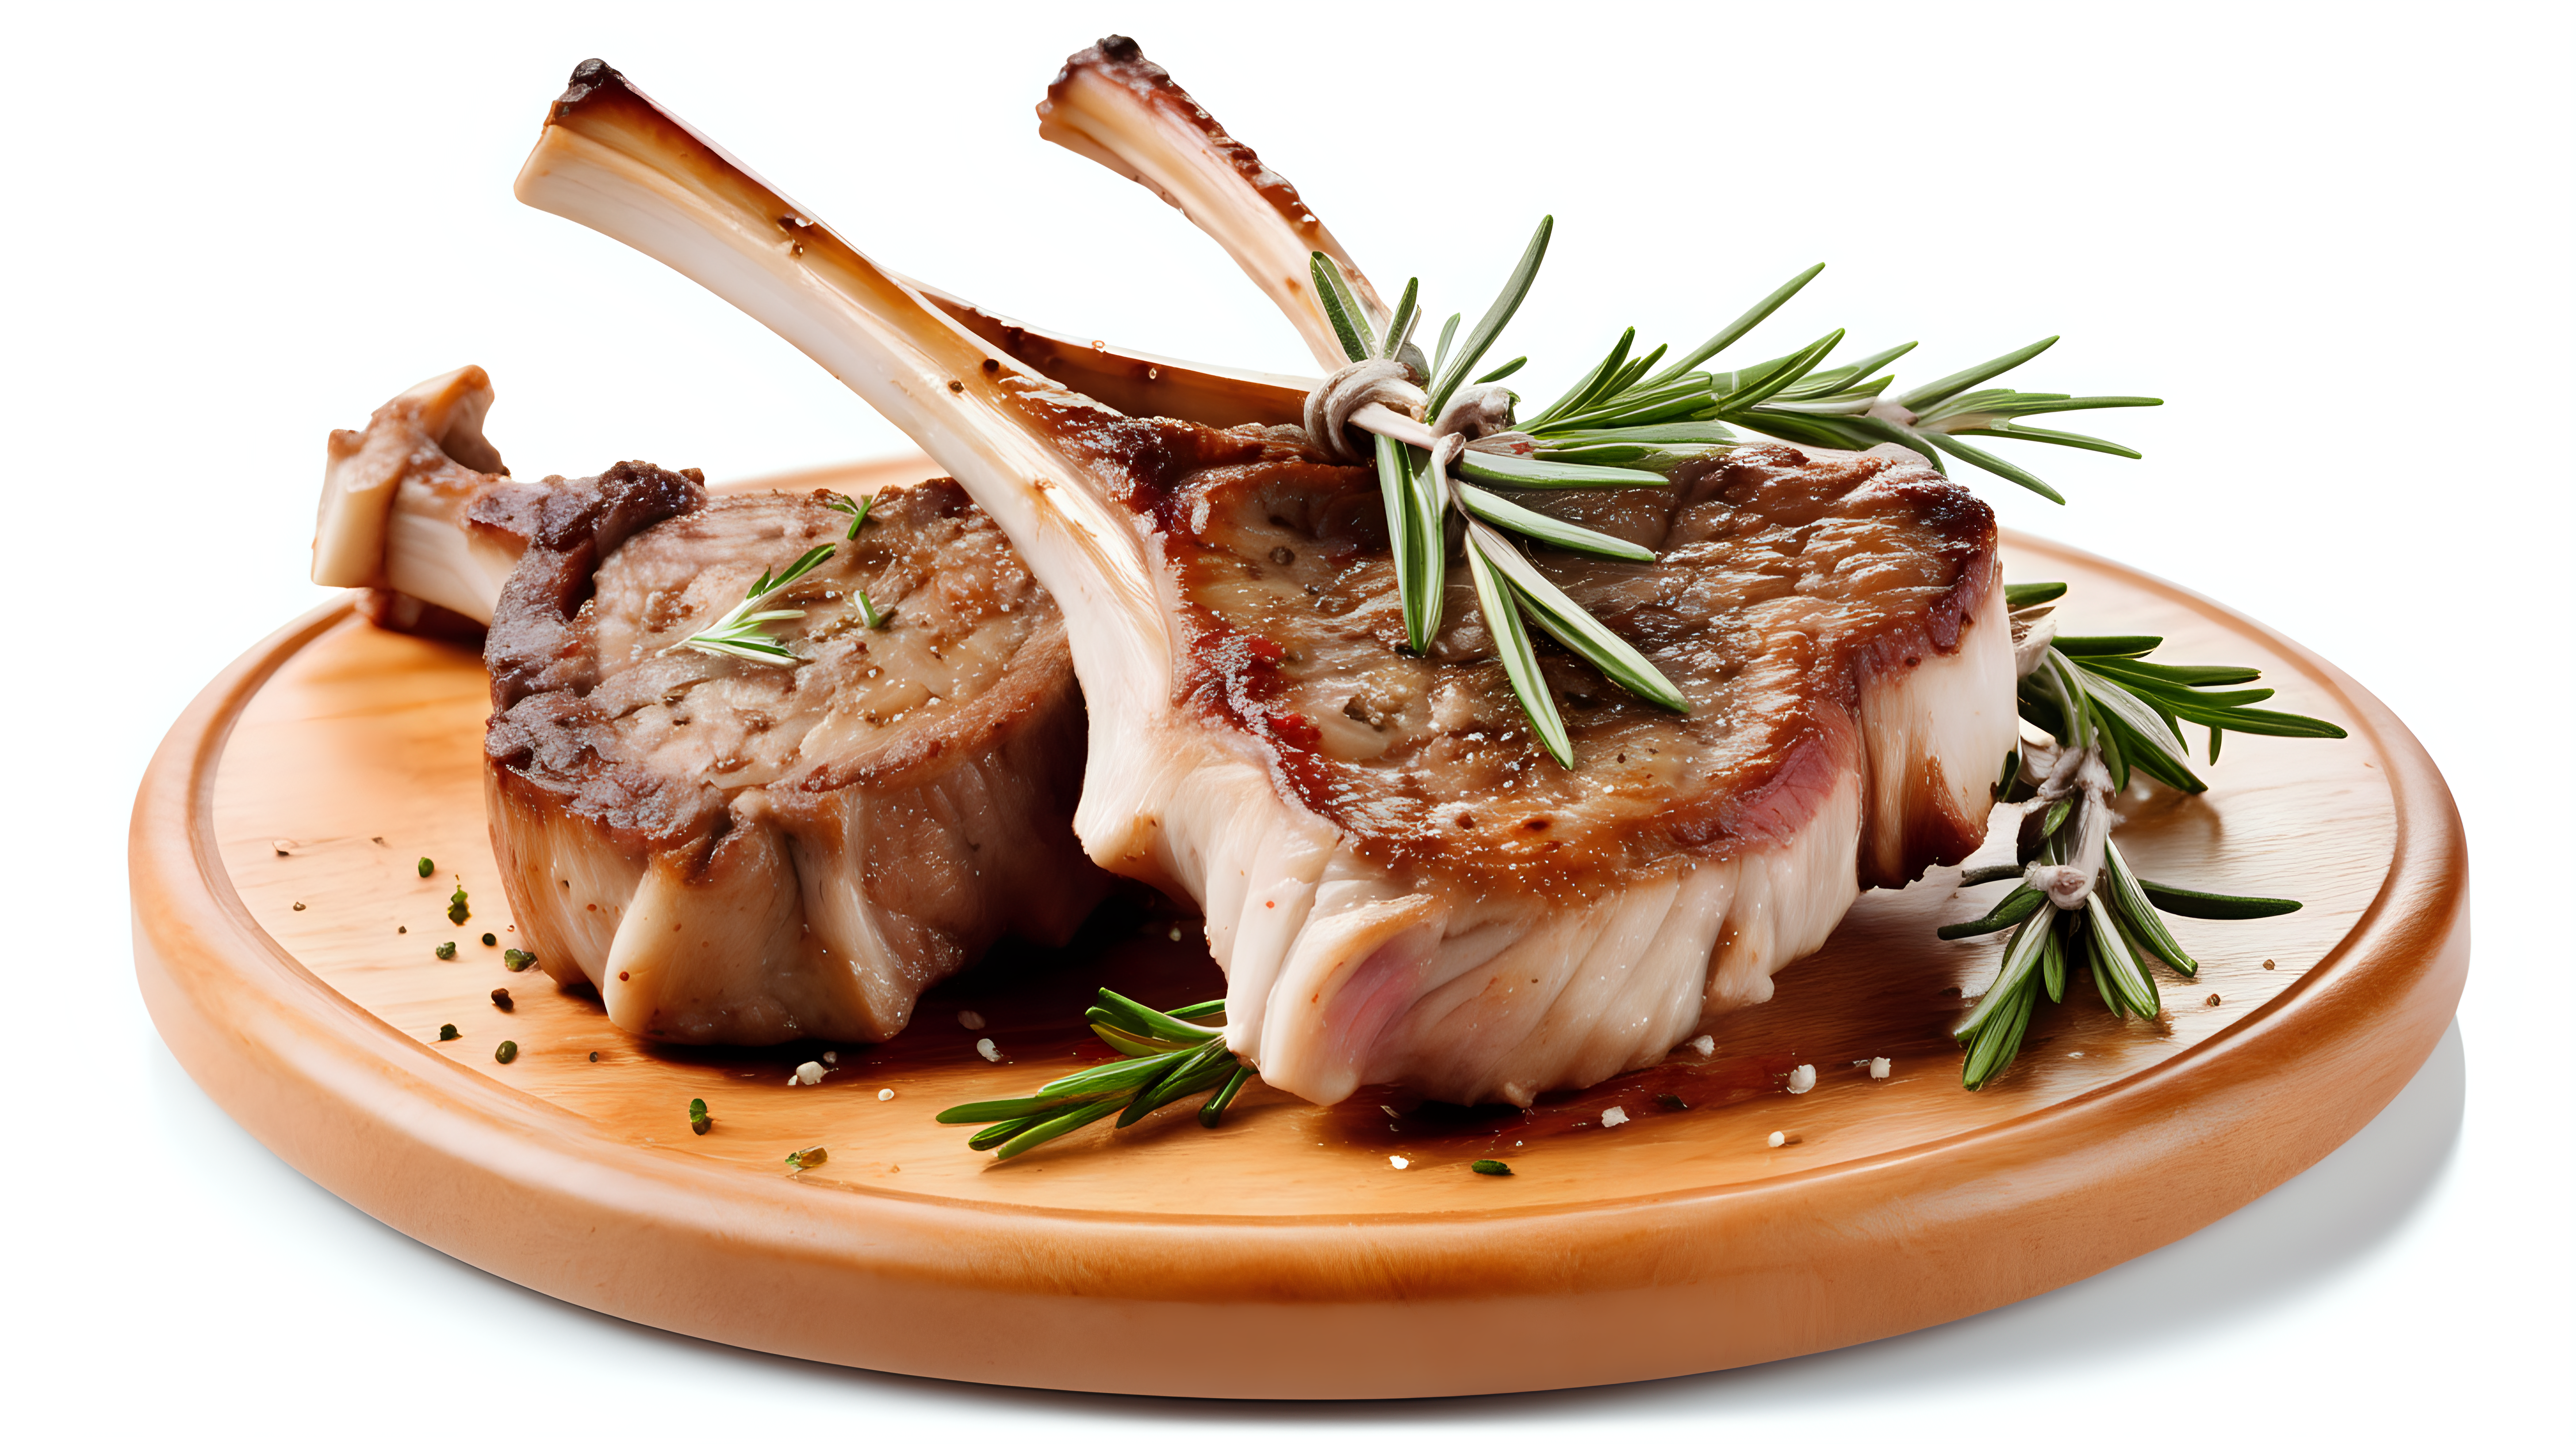 lamb chop with rosemary on wooden plate isolated